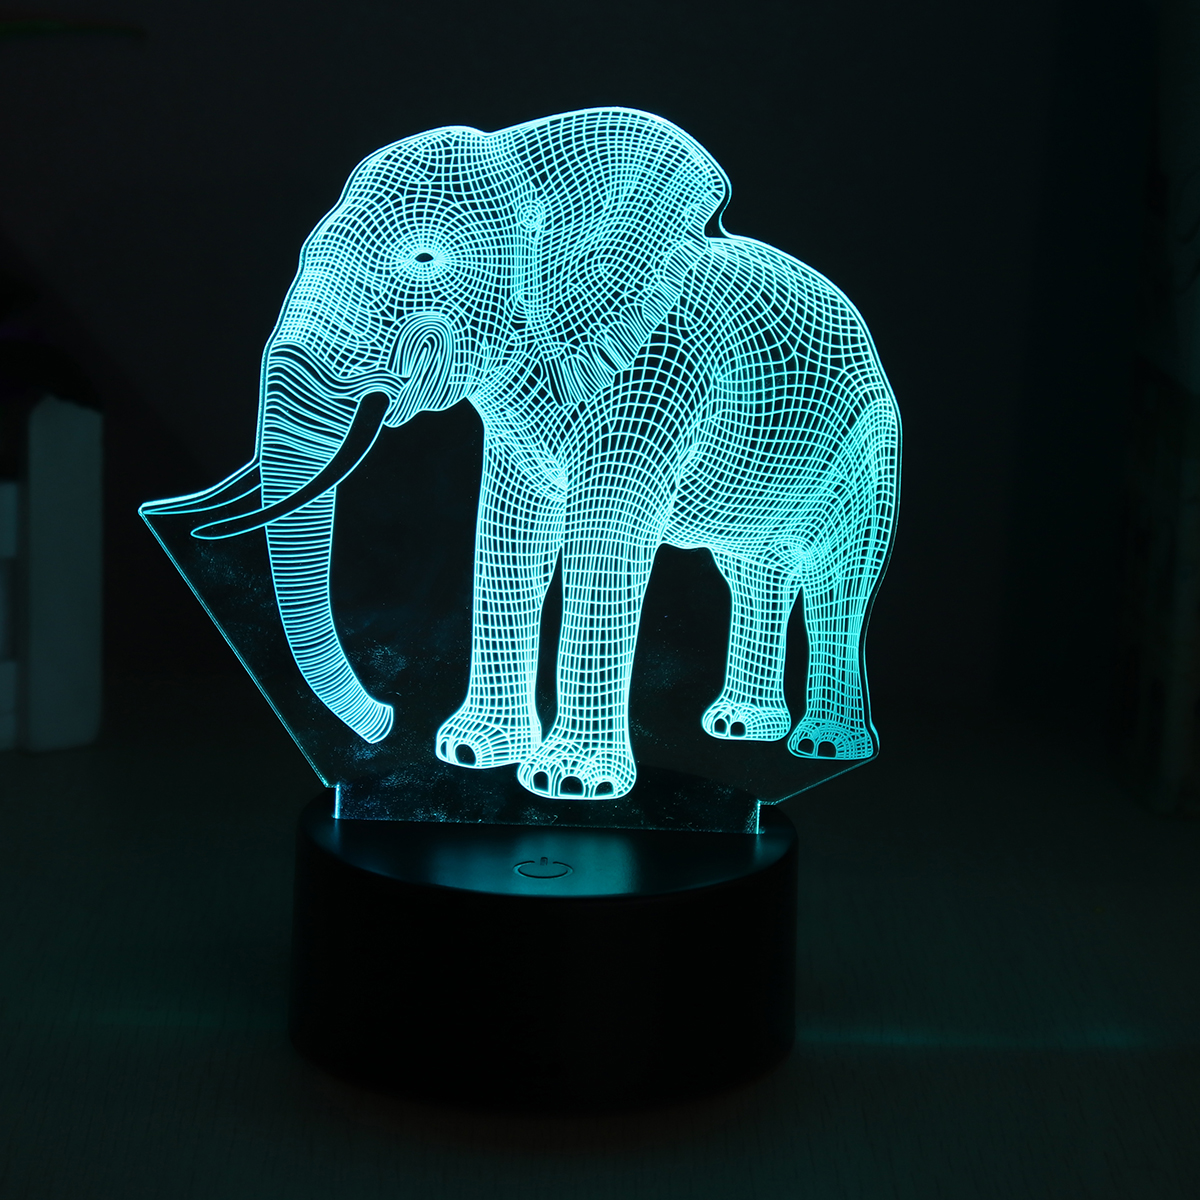 3D-Acrylic-LED-716-Colors-Colorful-Night-Lights-Elephant-Model-Remote-Control-Touch-Switch-Night-Lig-1370467-13